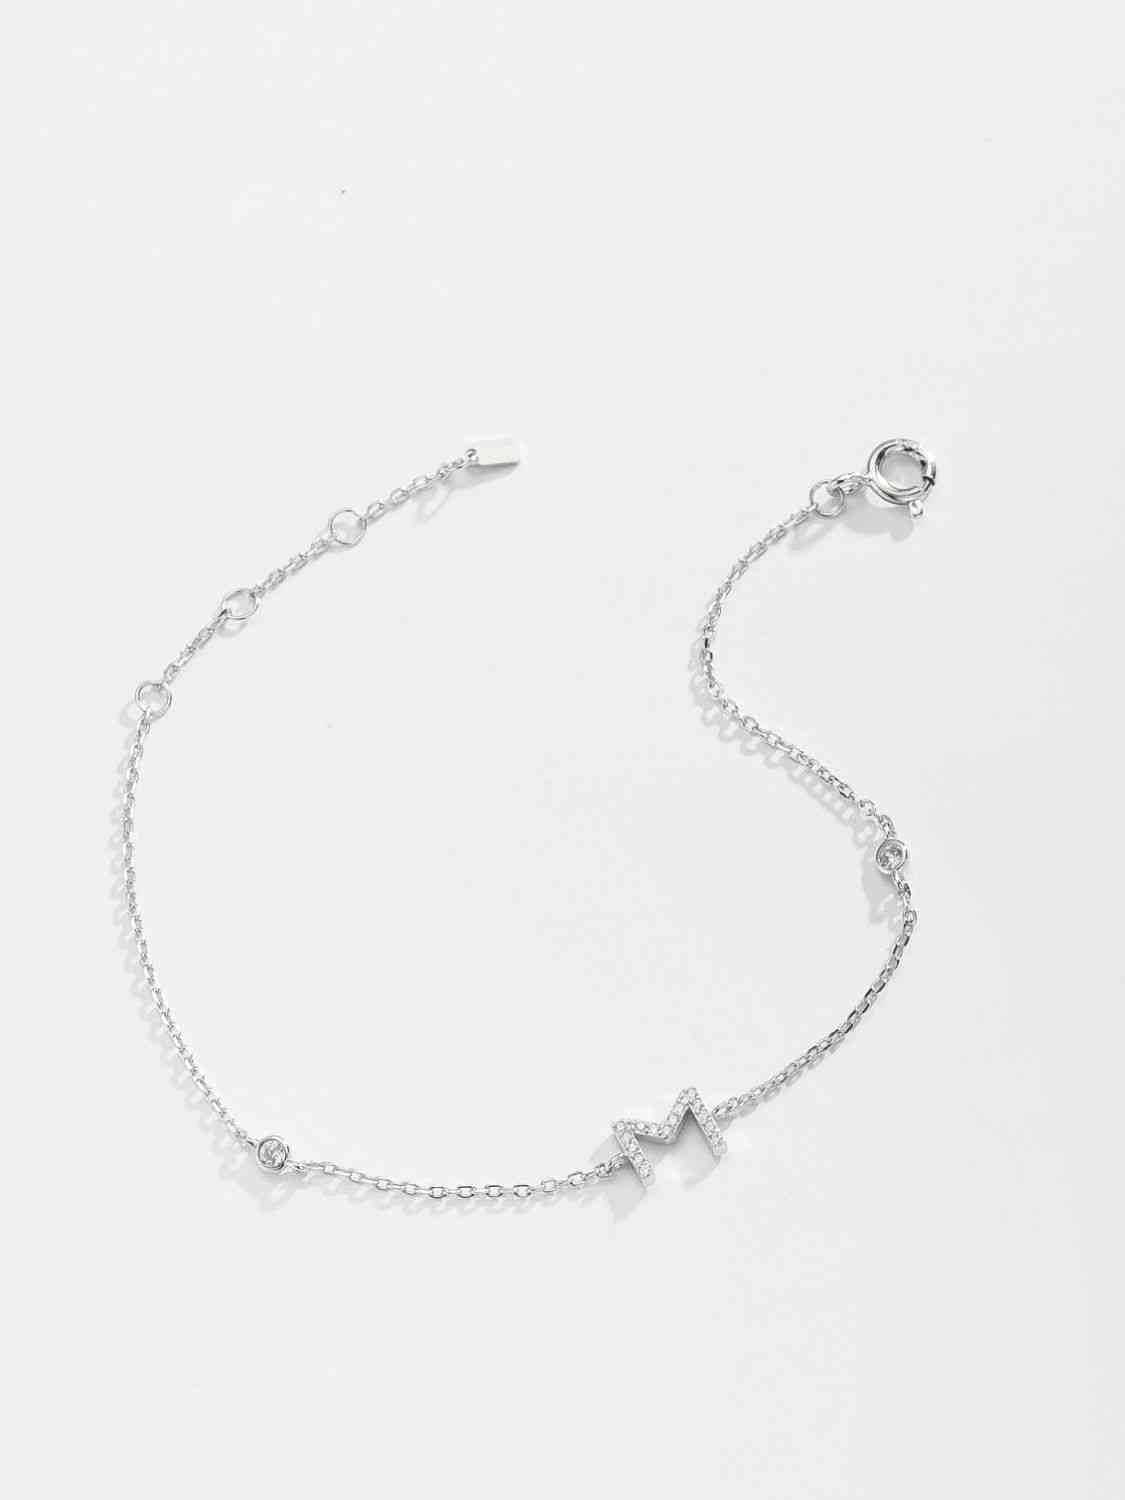 L To P Silver Bracelet with Zircon Accents